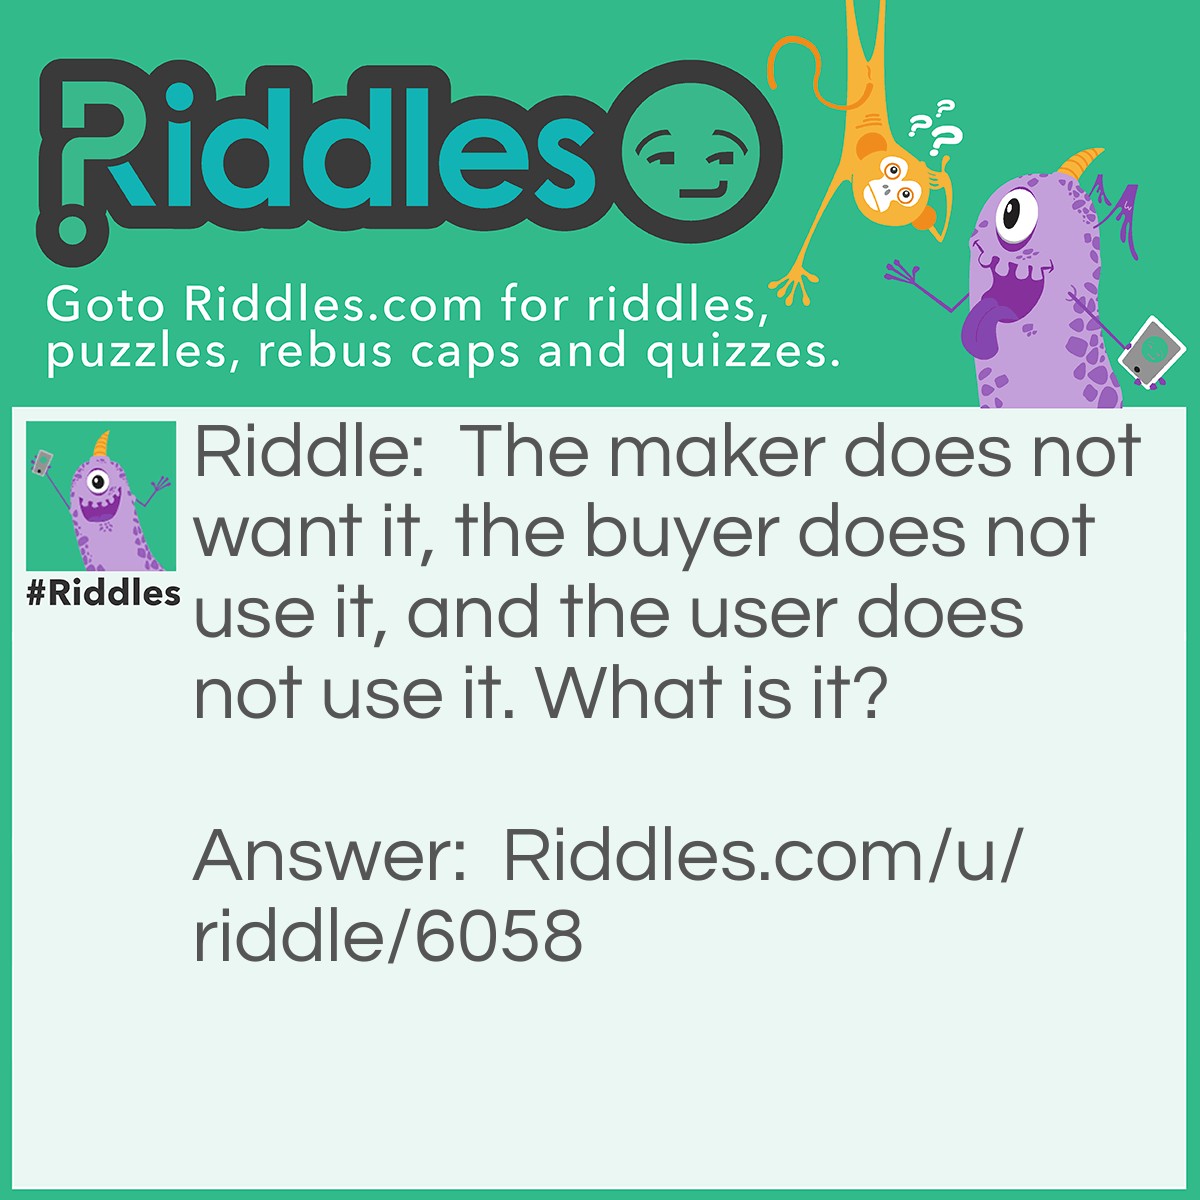 Riddle: The maker does not want it, the buyer does not use it, and the user does not use it. What is it? Answer: A coffin.